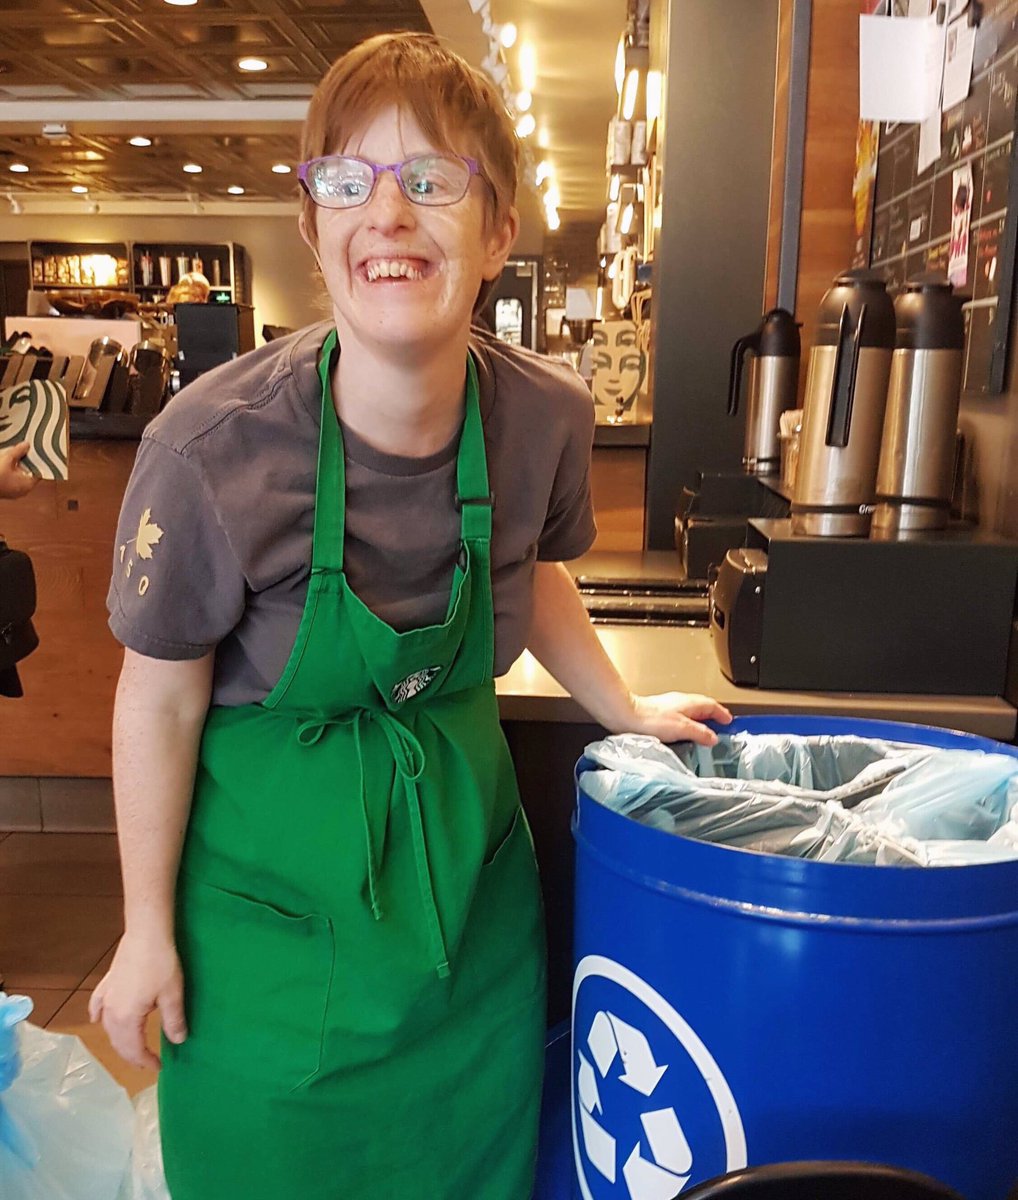 Go Jo Go! 🤗 Joanna has been working at @StarbucksCanada since last September. Congrats on all your hard work and your upcoming work anniversary Joanna! #inclusion #diversity #yyjjobs #happy